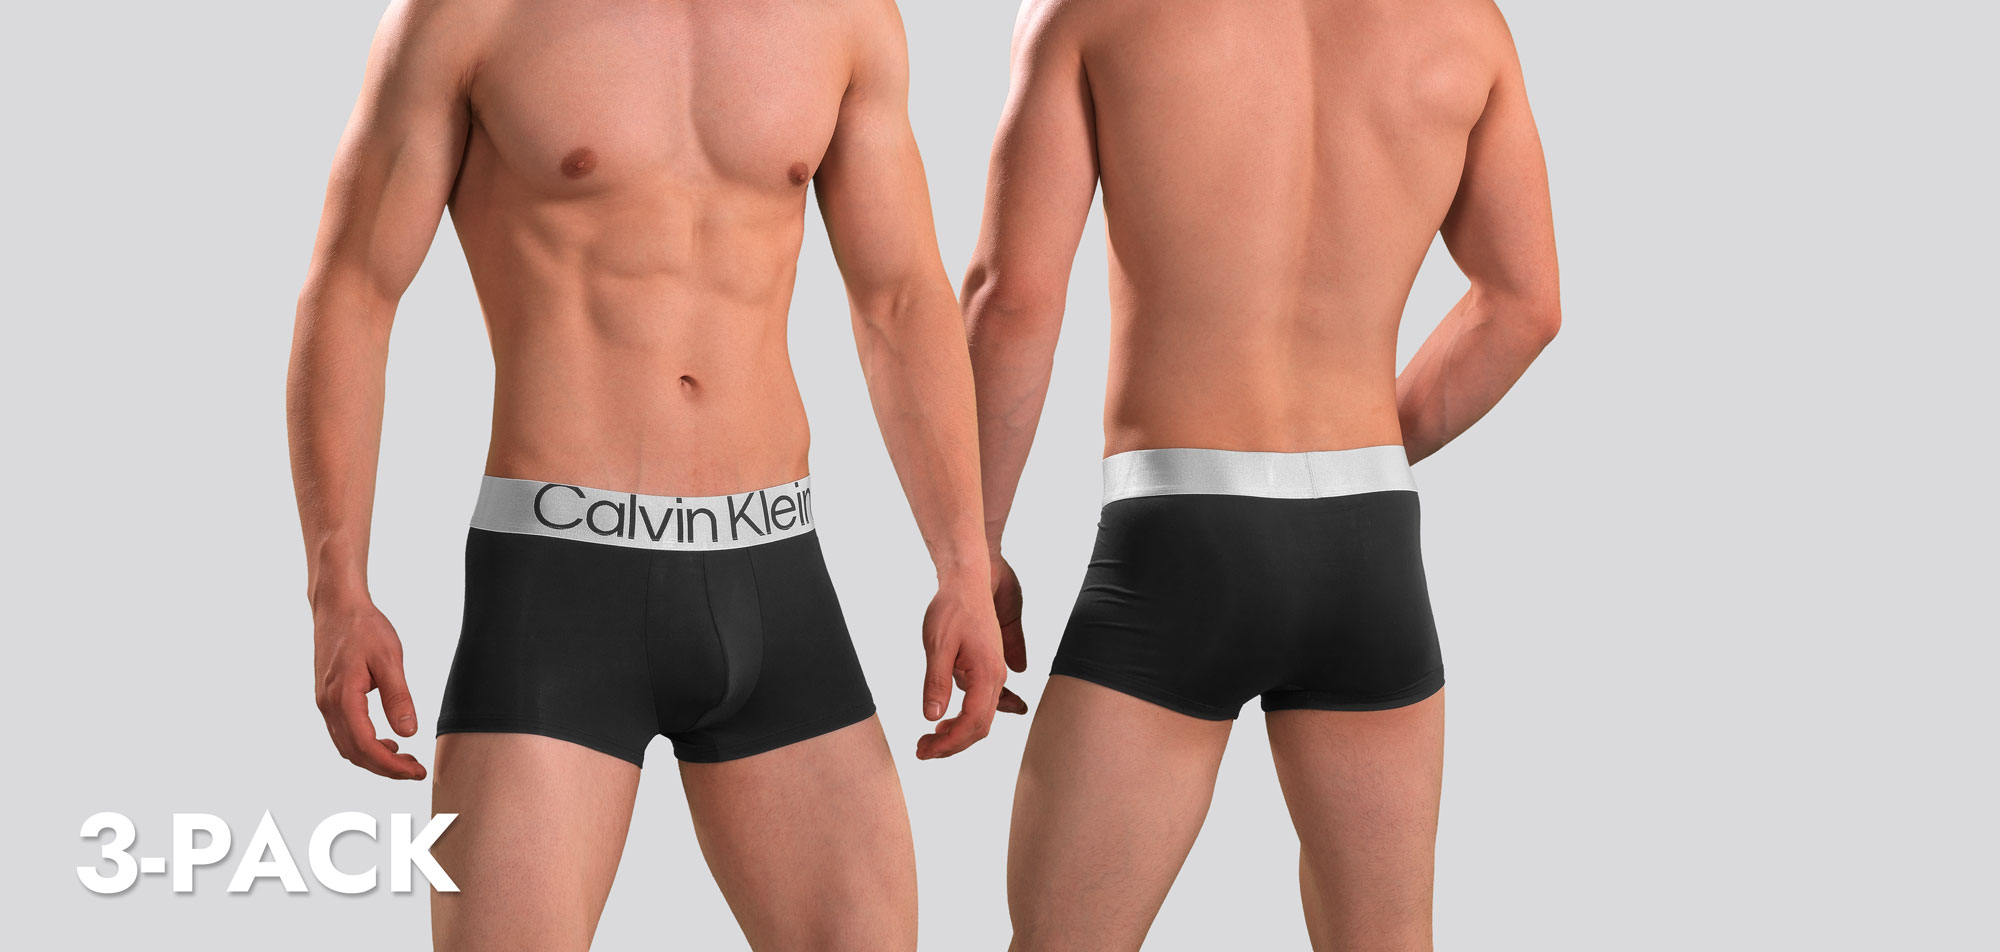 Calvin Klein Low Rise Trunk 3-pack NB3074A Microfiber Reconsidered